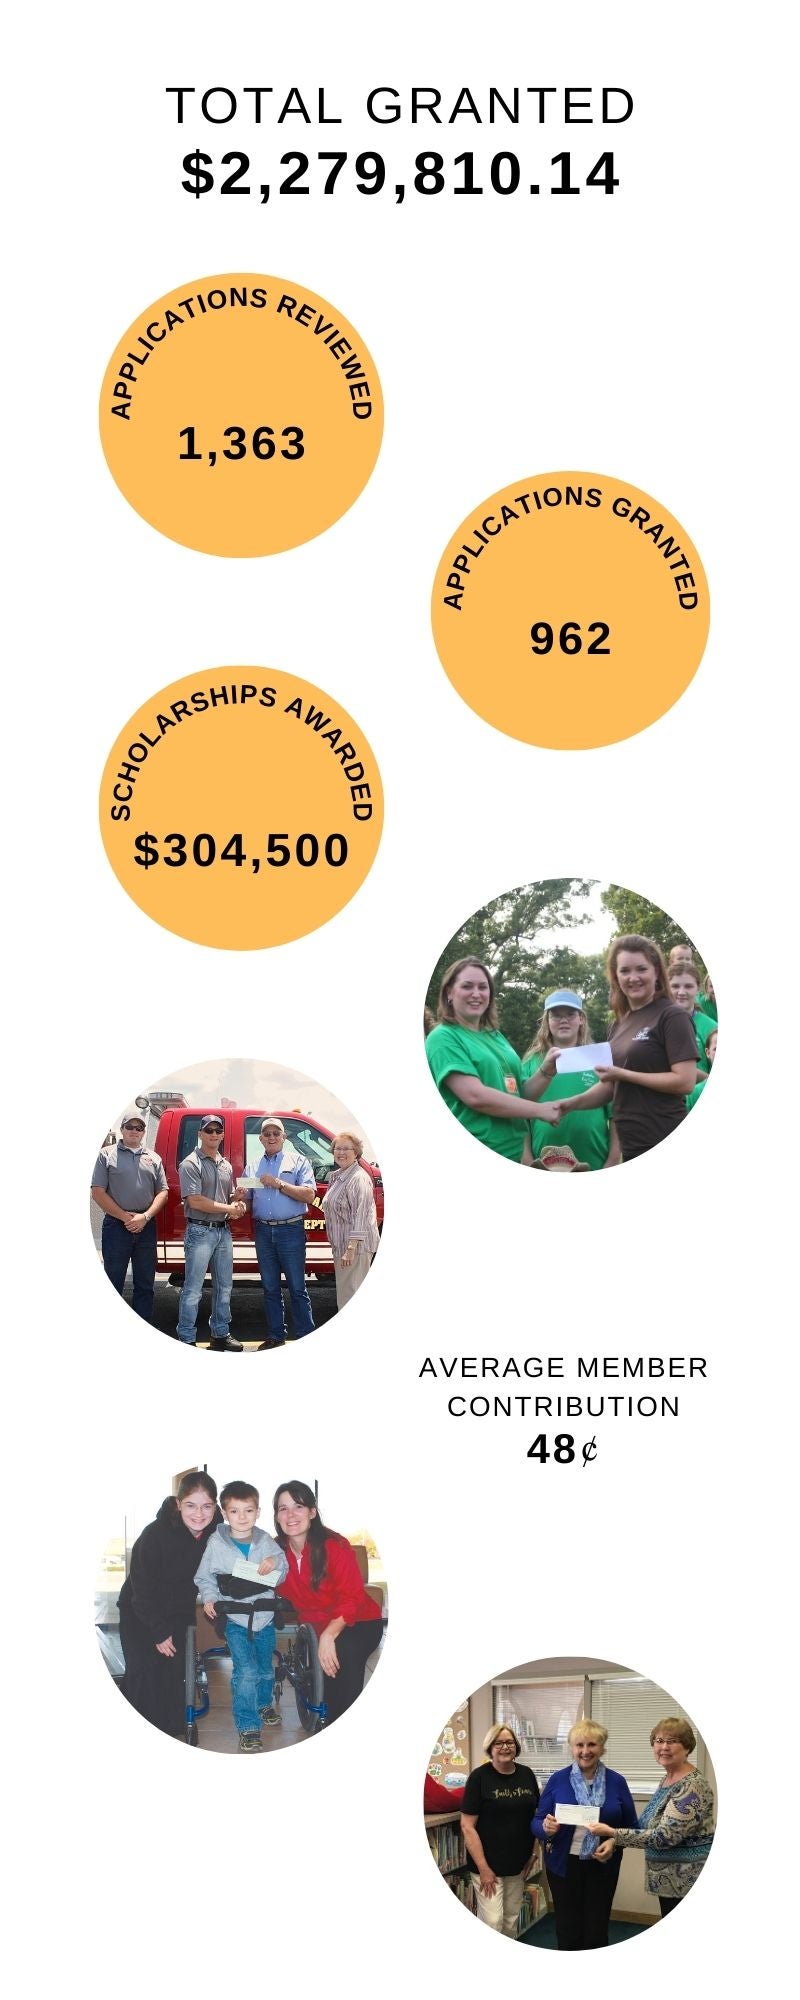 Total Granted: $2,279,810.14.  Applications Reviewed: 1,363. Applications Granted: 962. Scholarships Awarded: $304,500. Average Member Contribution: 48 cents.